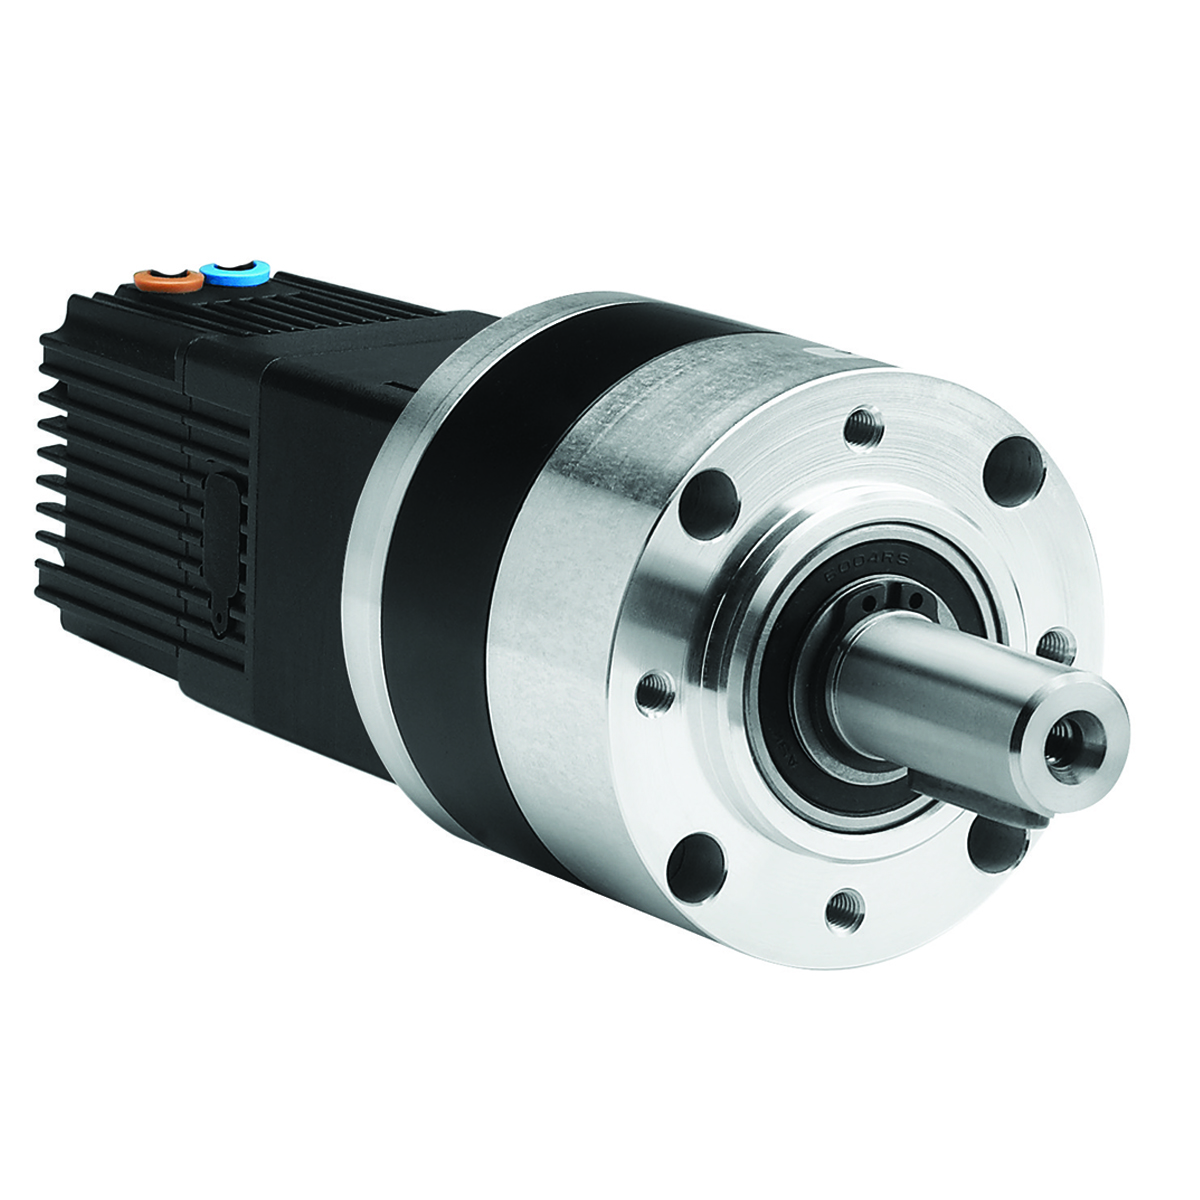 SQ57 Motor 150W 12-32Vdc + Drive TNi21 PWM + Gearbox P81 - 3 stages ratio 139.13